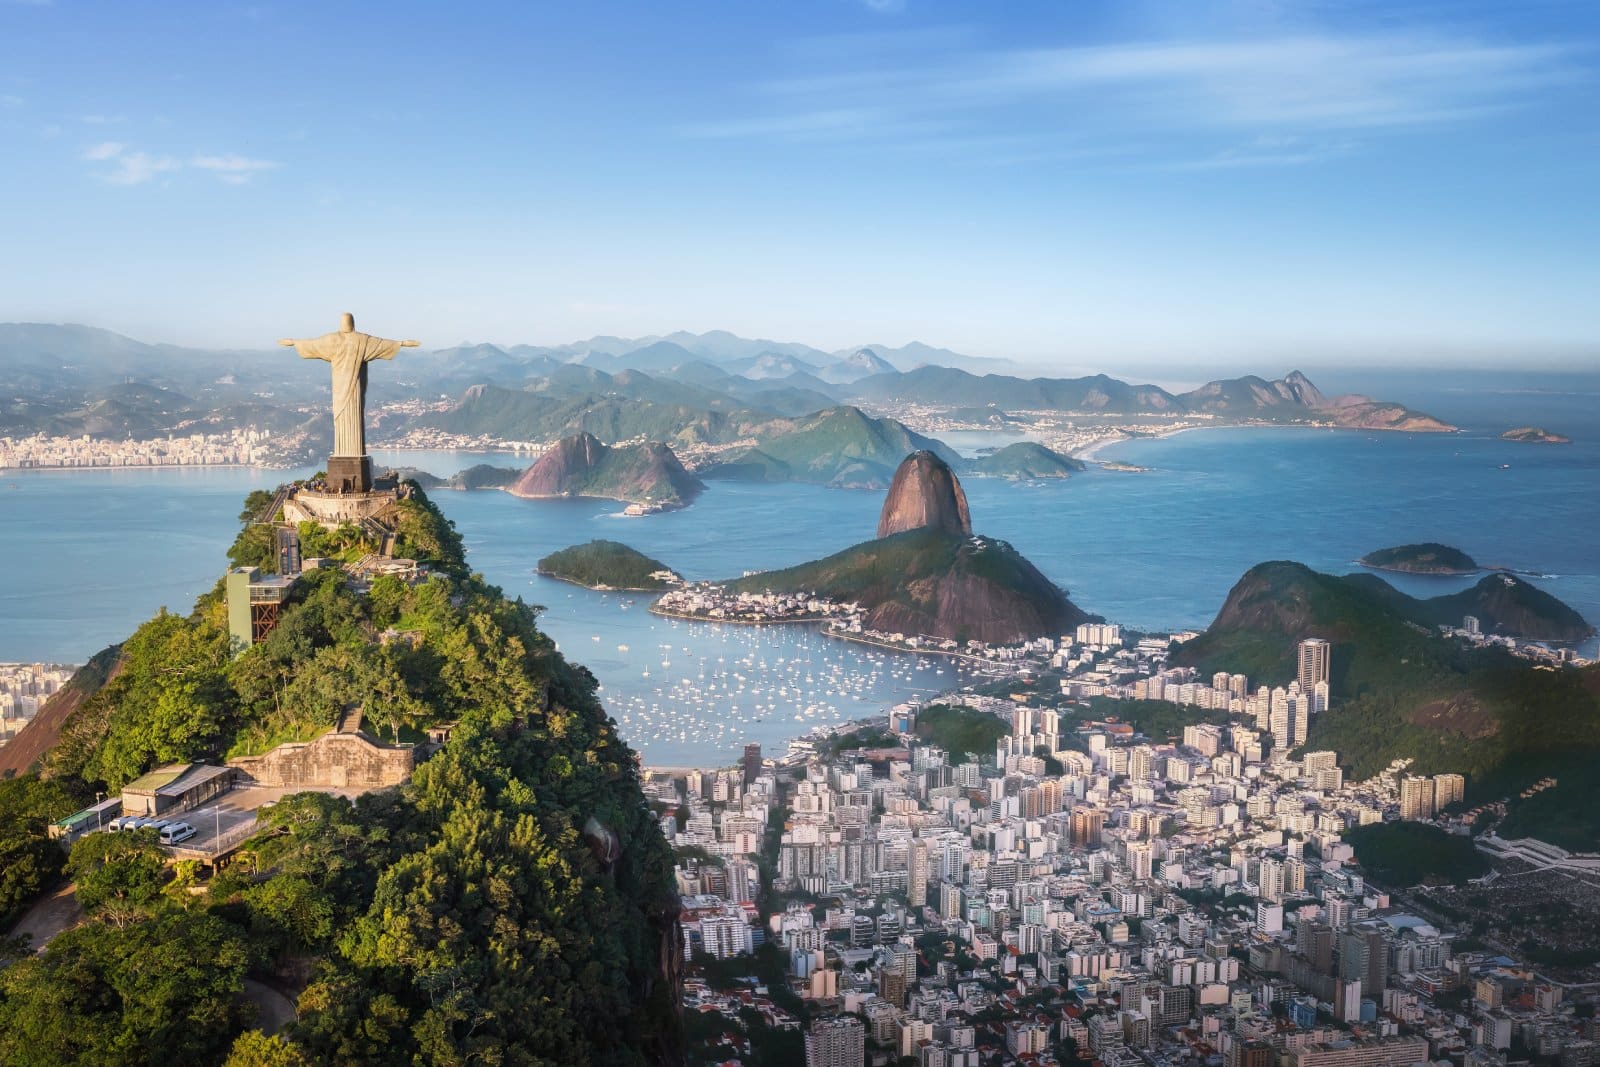 <p><span>Head further south to Brazil, which requires US workers to meet one of the lowest income thresholds on this list (less than $20,000 per year!), in order to enjoy the vibrancy and excitement of this South American nation.</span></p><p><b>Cost of application:</b><span> 100 USD</span></p><p><b>Income requirement:</b><span> 1500 USD per month</span></p><p><b>Visa duration: </b><span>6 months to</span> <span>1 year</span></p>